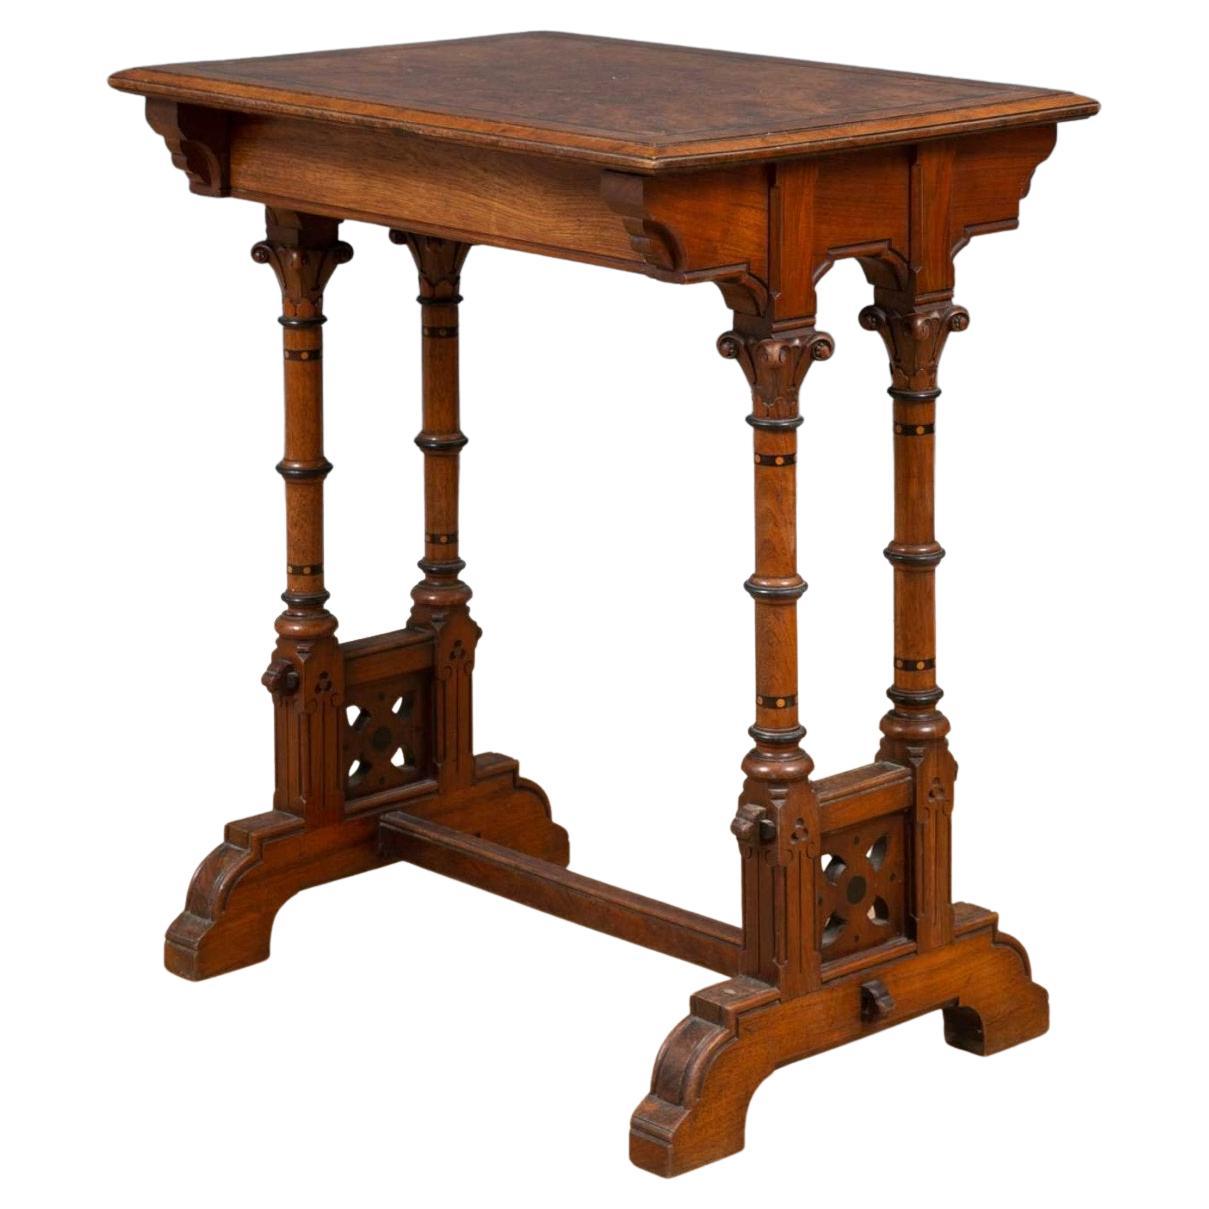 Charles Bevan for Marsh & Jones. A Small Walnut Writing Table on Turned Supports